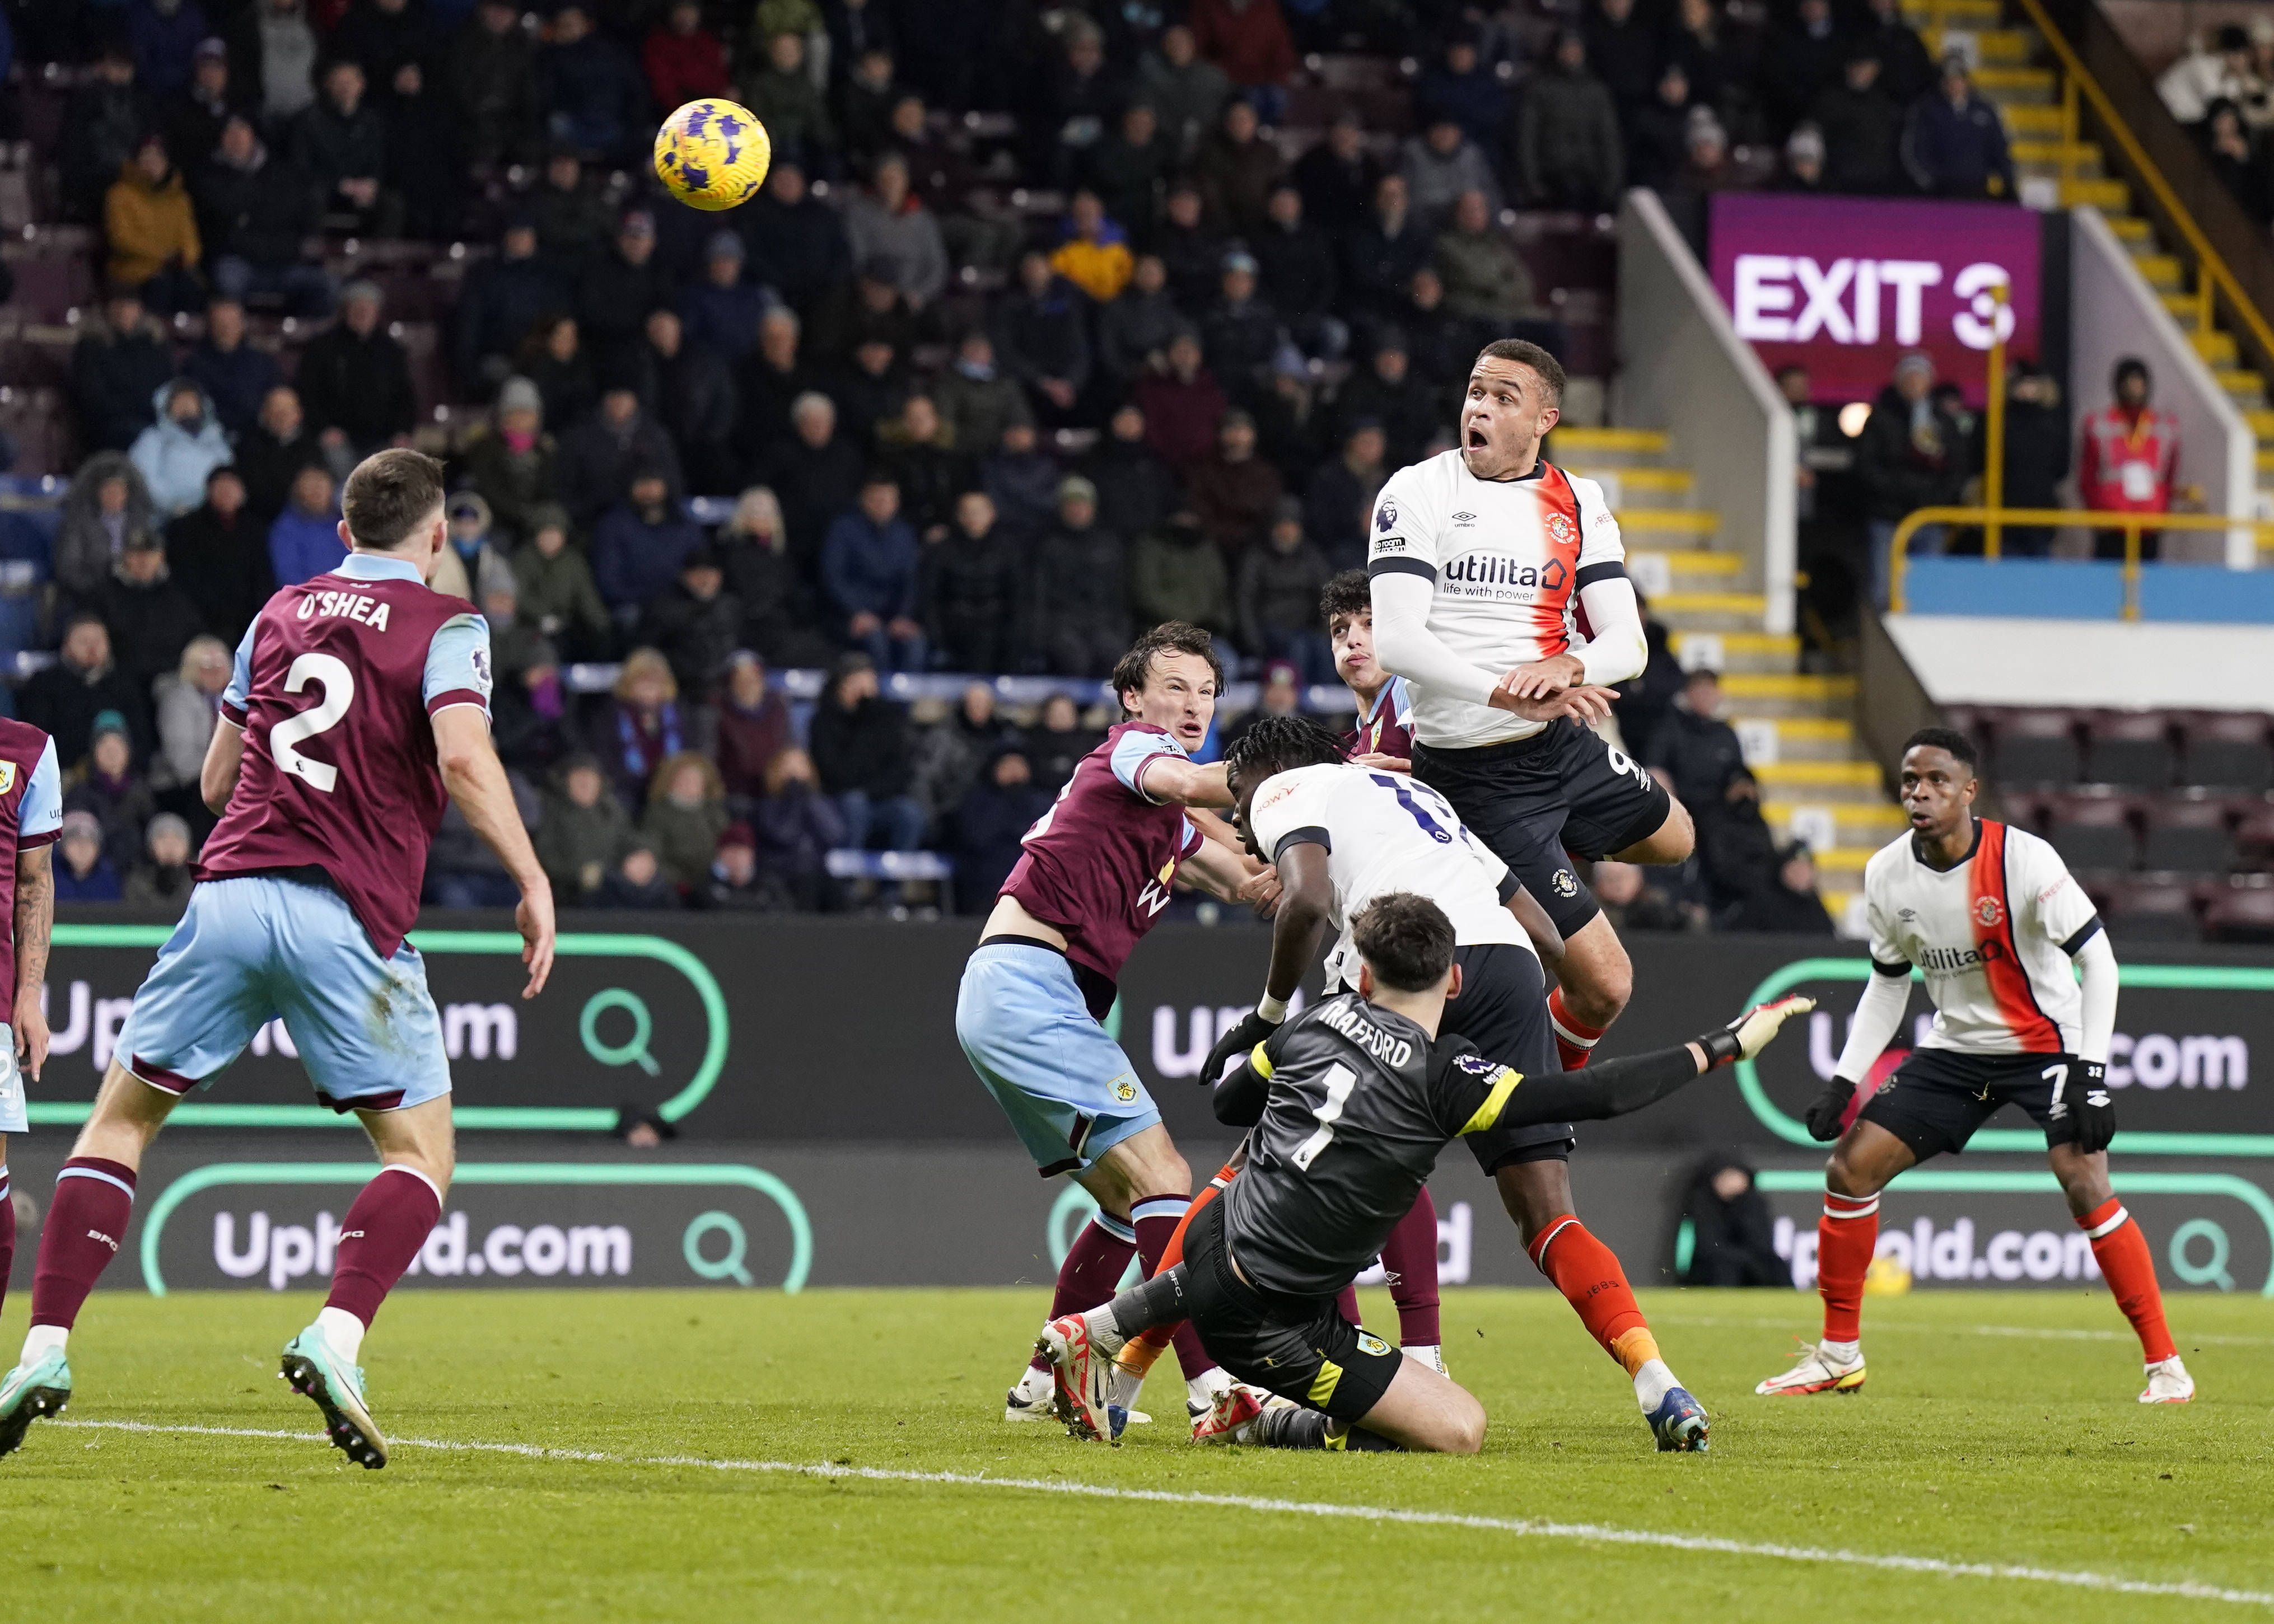 Burnley and Luton Town drew in a tough (and controversial) match.